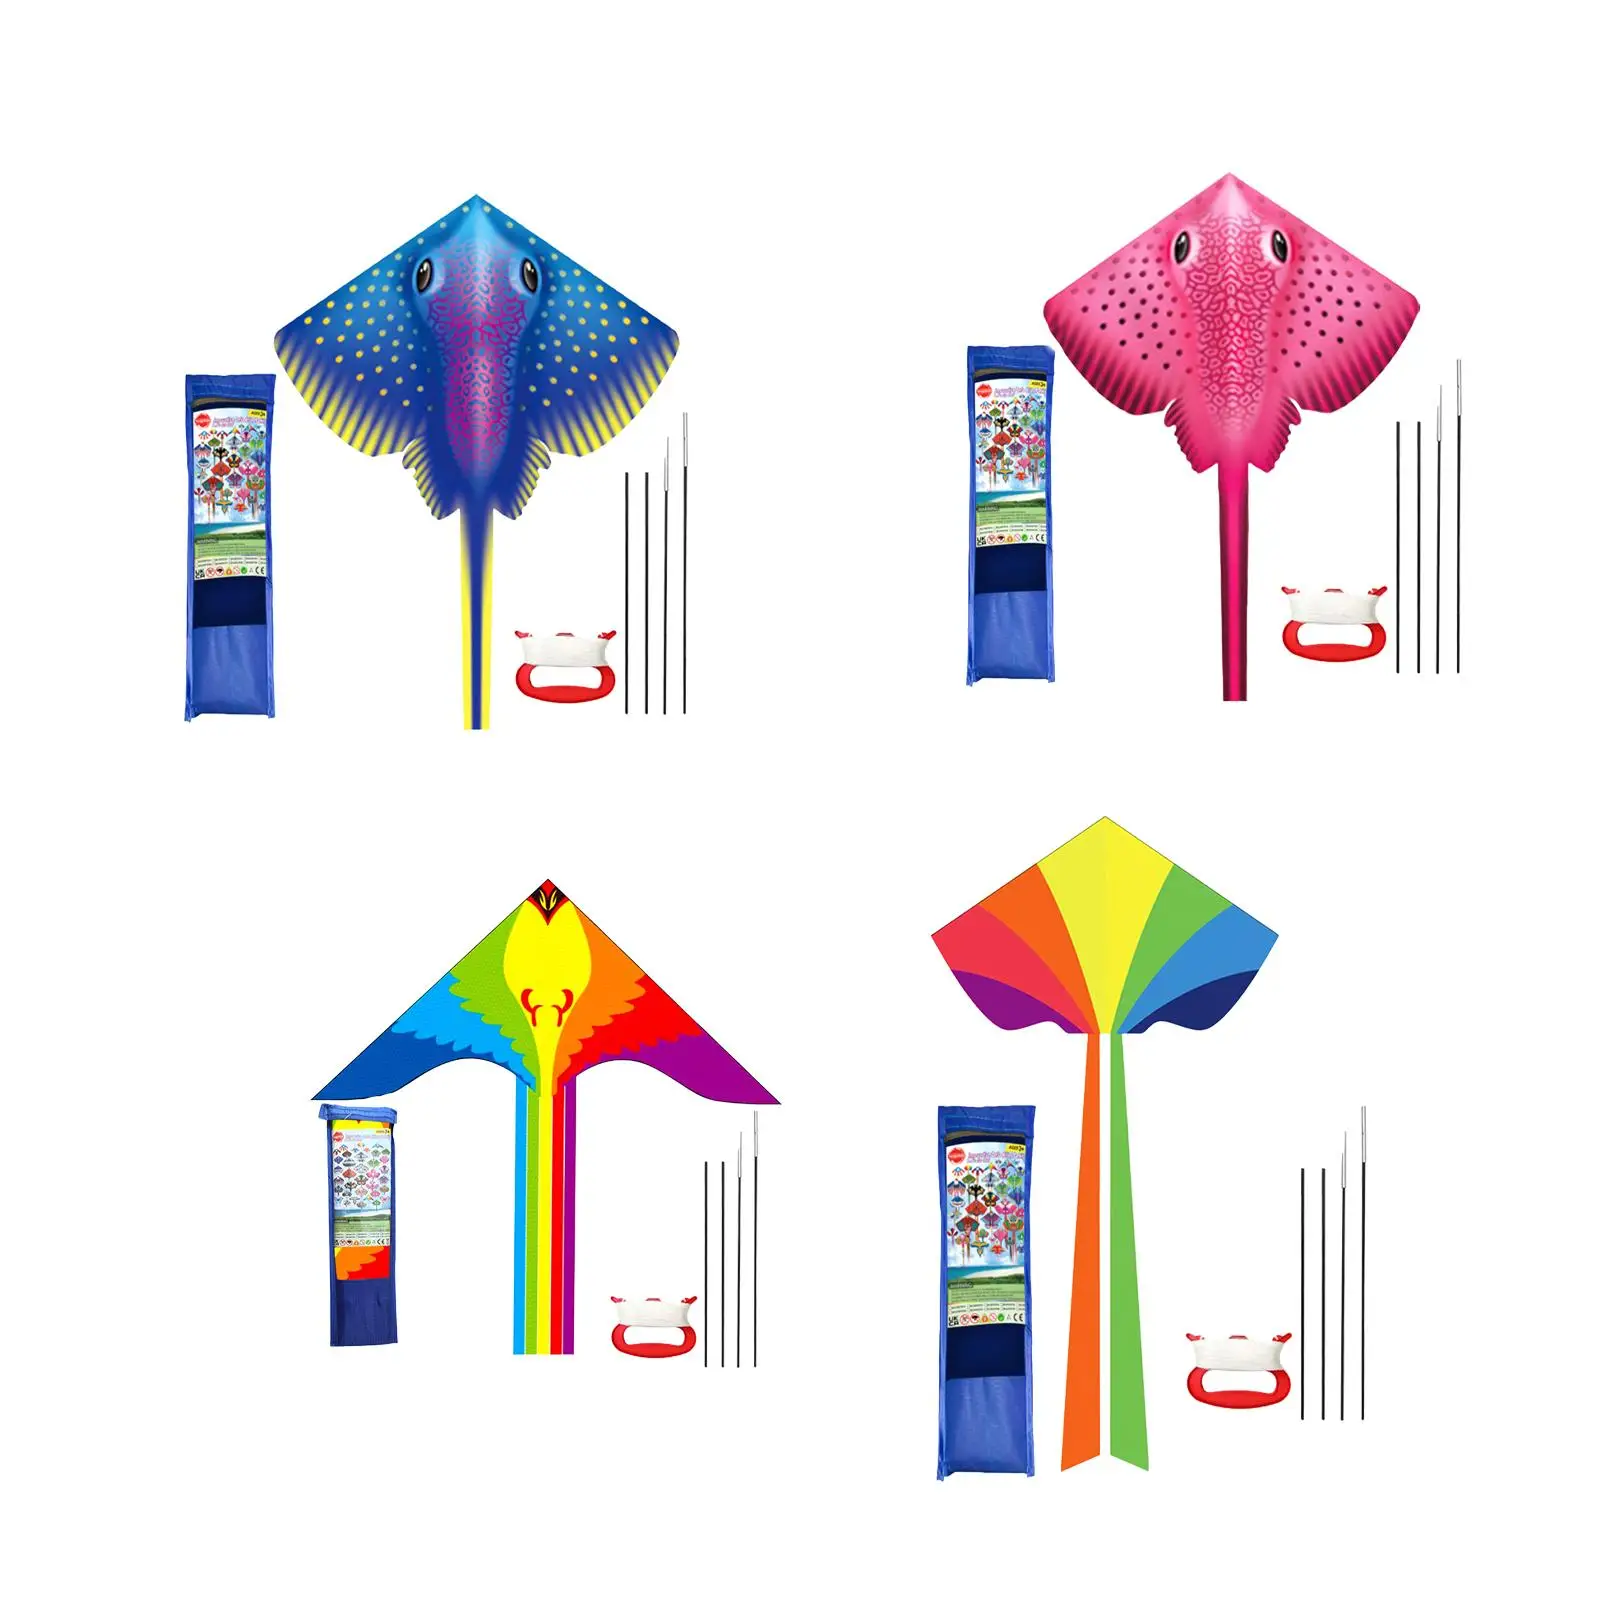 

Huge Kite Toy Cartoon Animal Shape Stable Lightweight Portable Fabric Kites for Park Outdoor Activities Beach Travel Festival